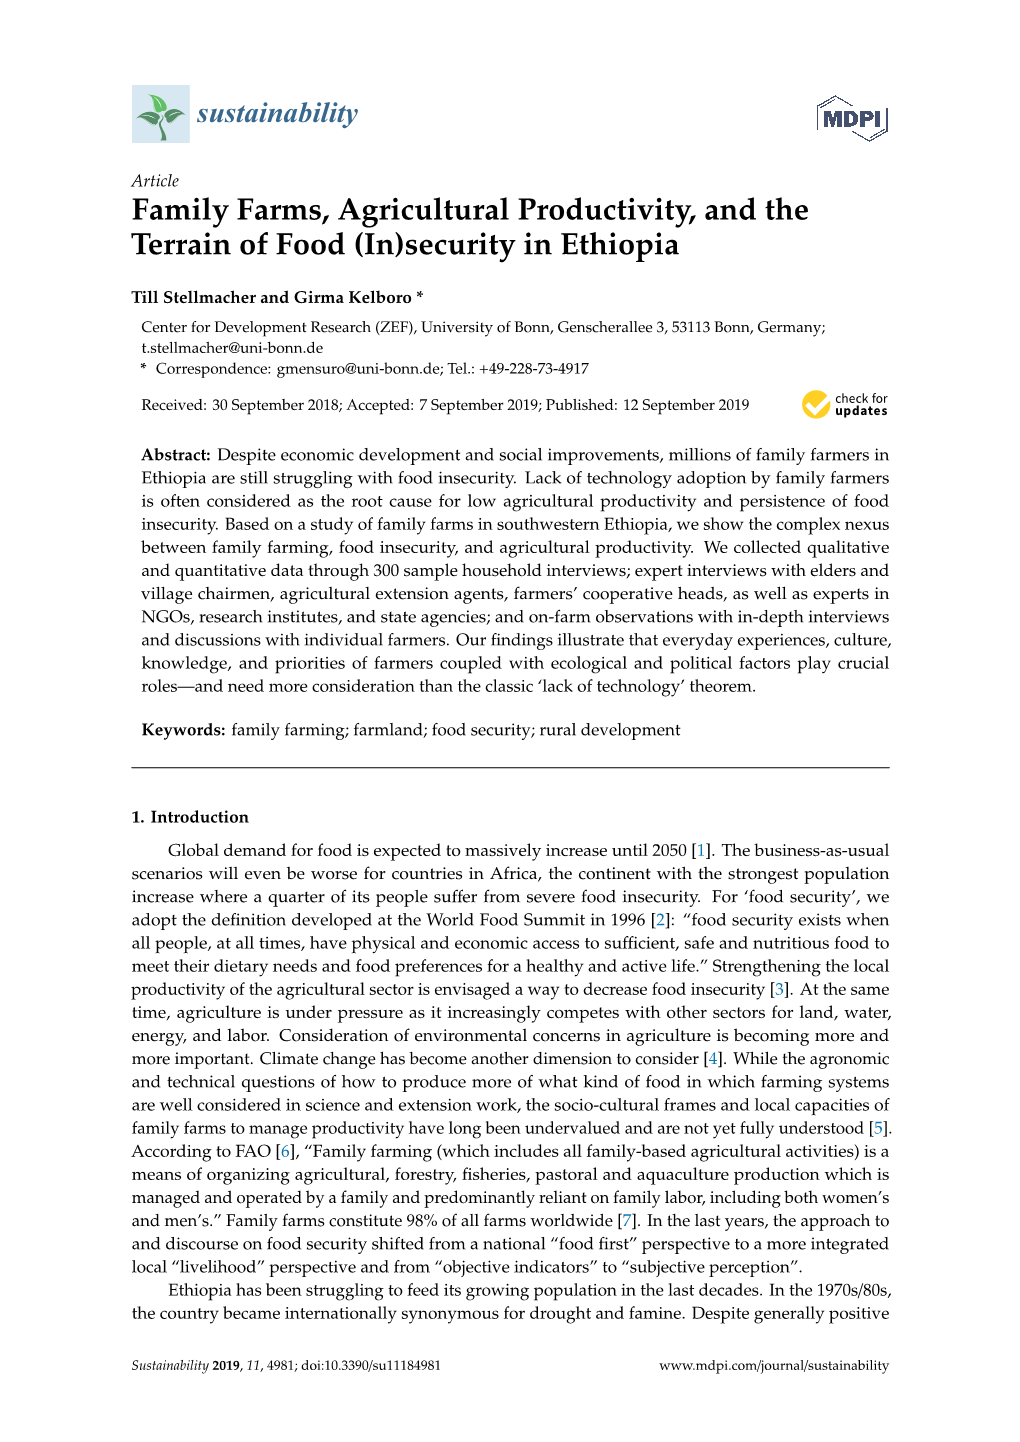 Family Farms, Agricultural Productivity, and the Terrain of Food (In)Security in Ethiopia